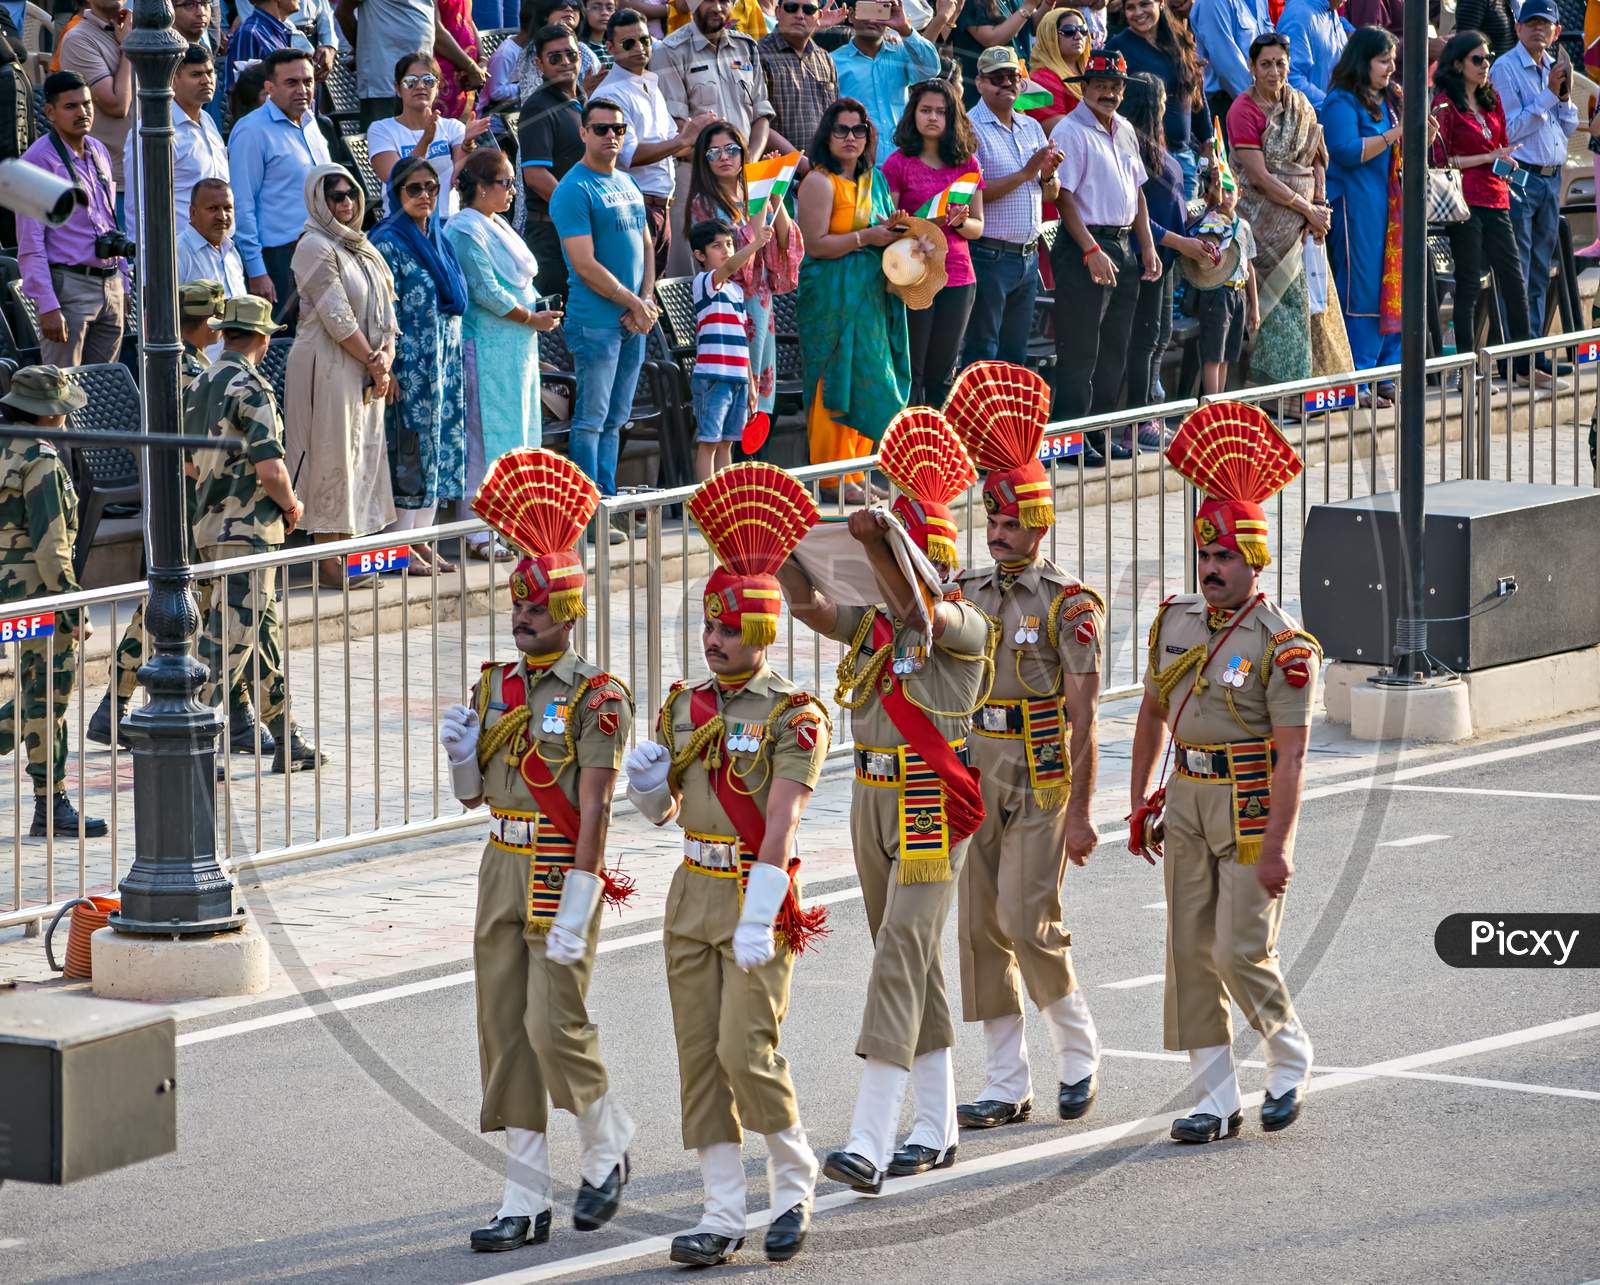 Amritsar,Punjab,India-April 14Th, 2019:Border Security Force Personnel Ceremoniuosly Taking Back The Lowered Indian National Flag After Beating Retreat Ceremony At The India-Pakistan Wagah Border.